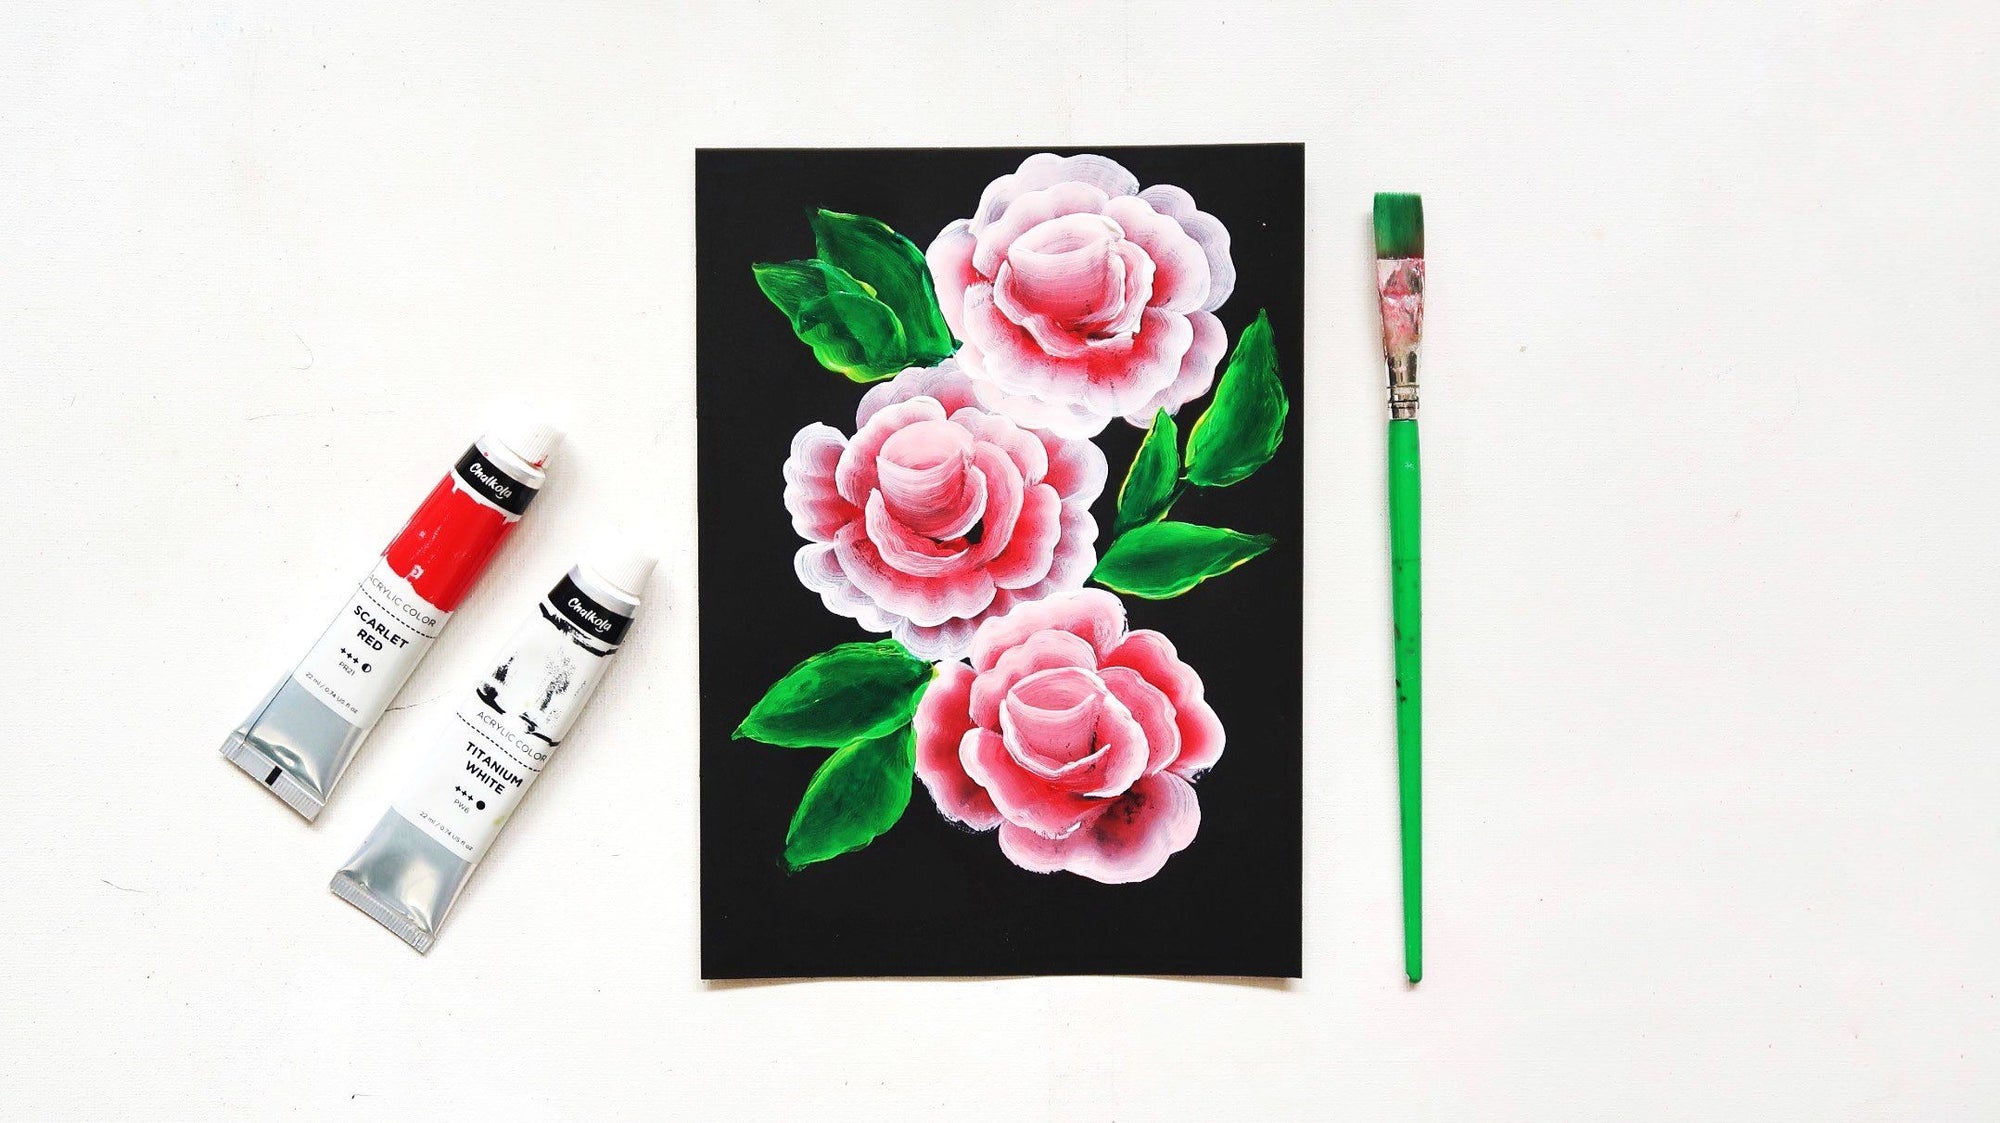 Acrylic Painting of Roses Using One Stroke Technique